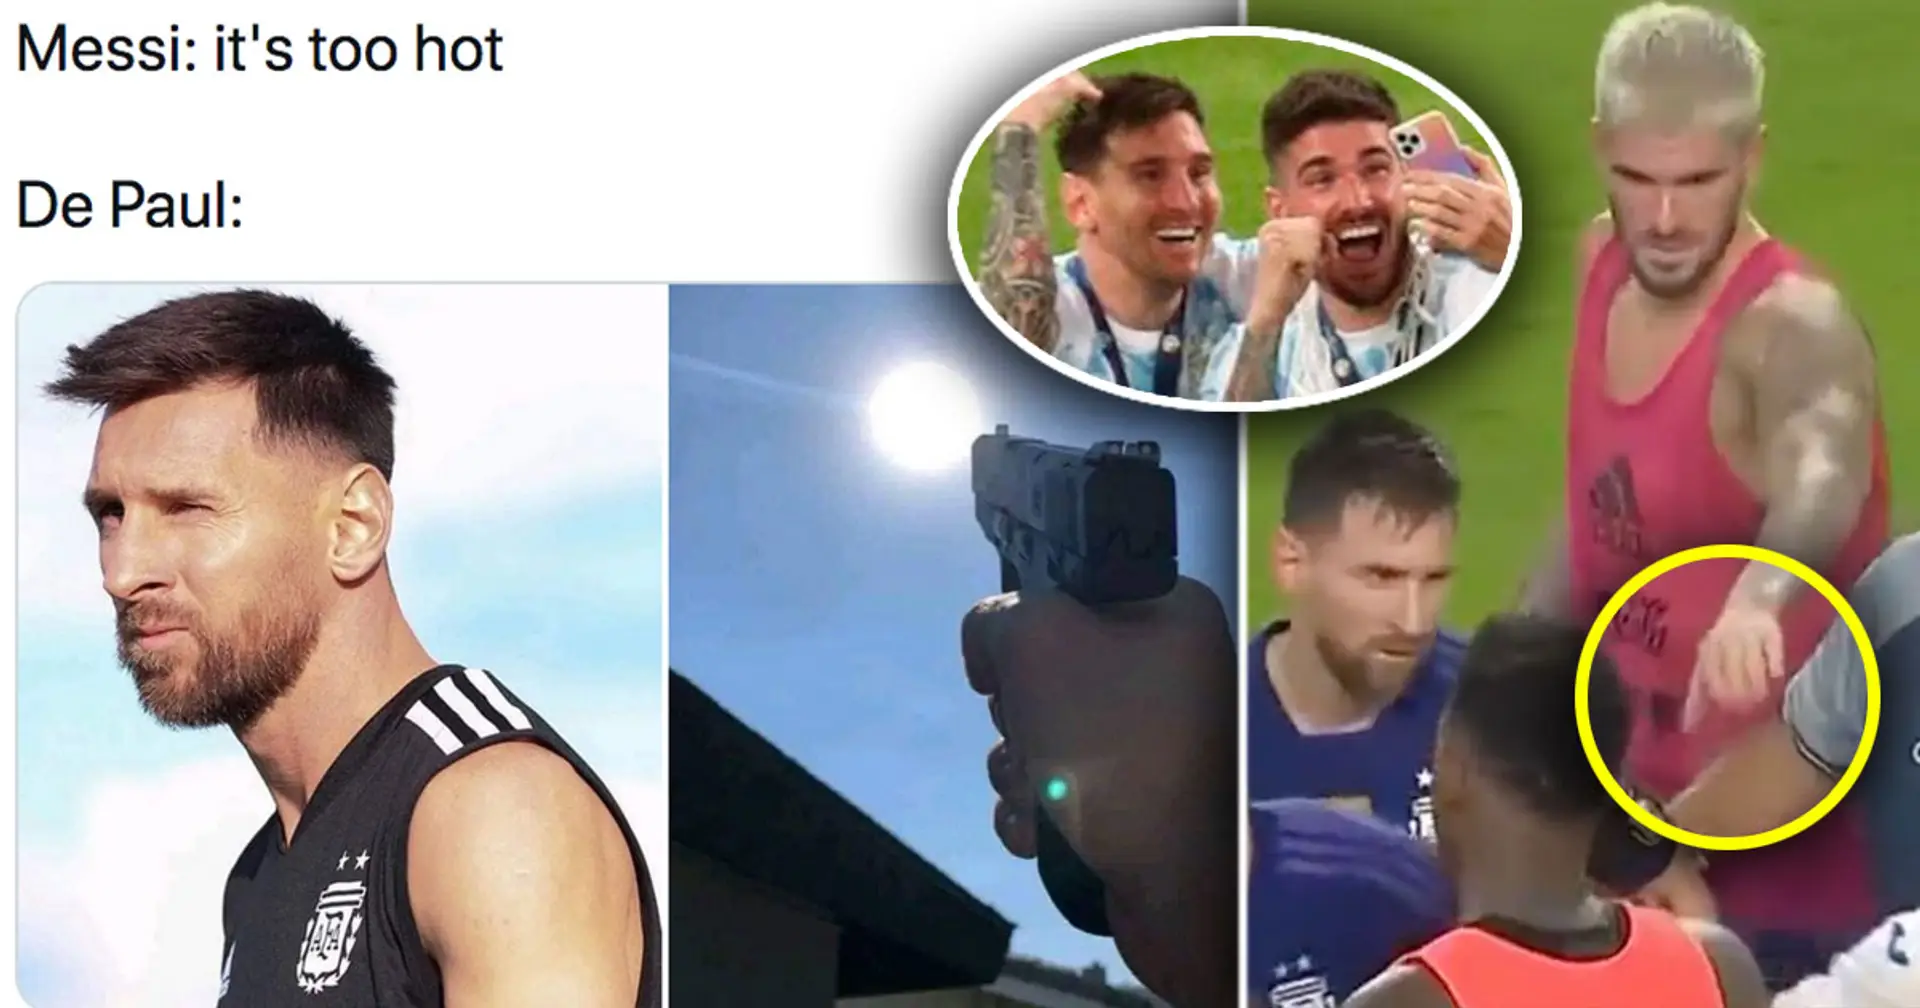 Why memes about Messi and De Paul trend on social media right now